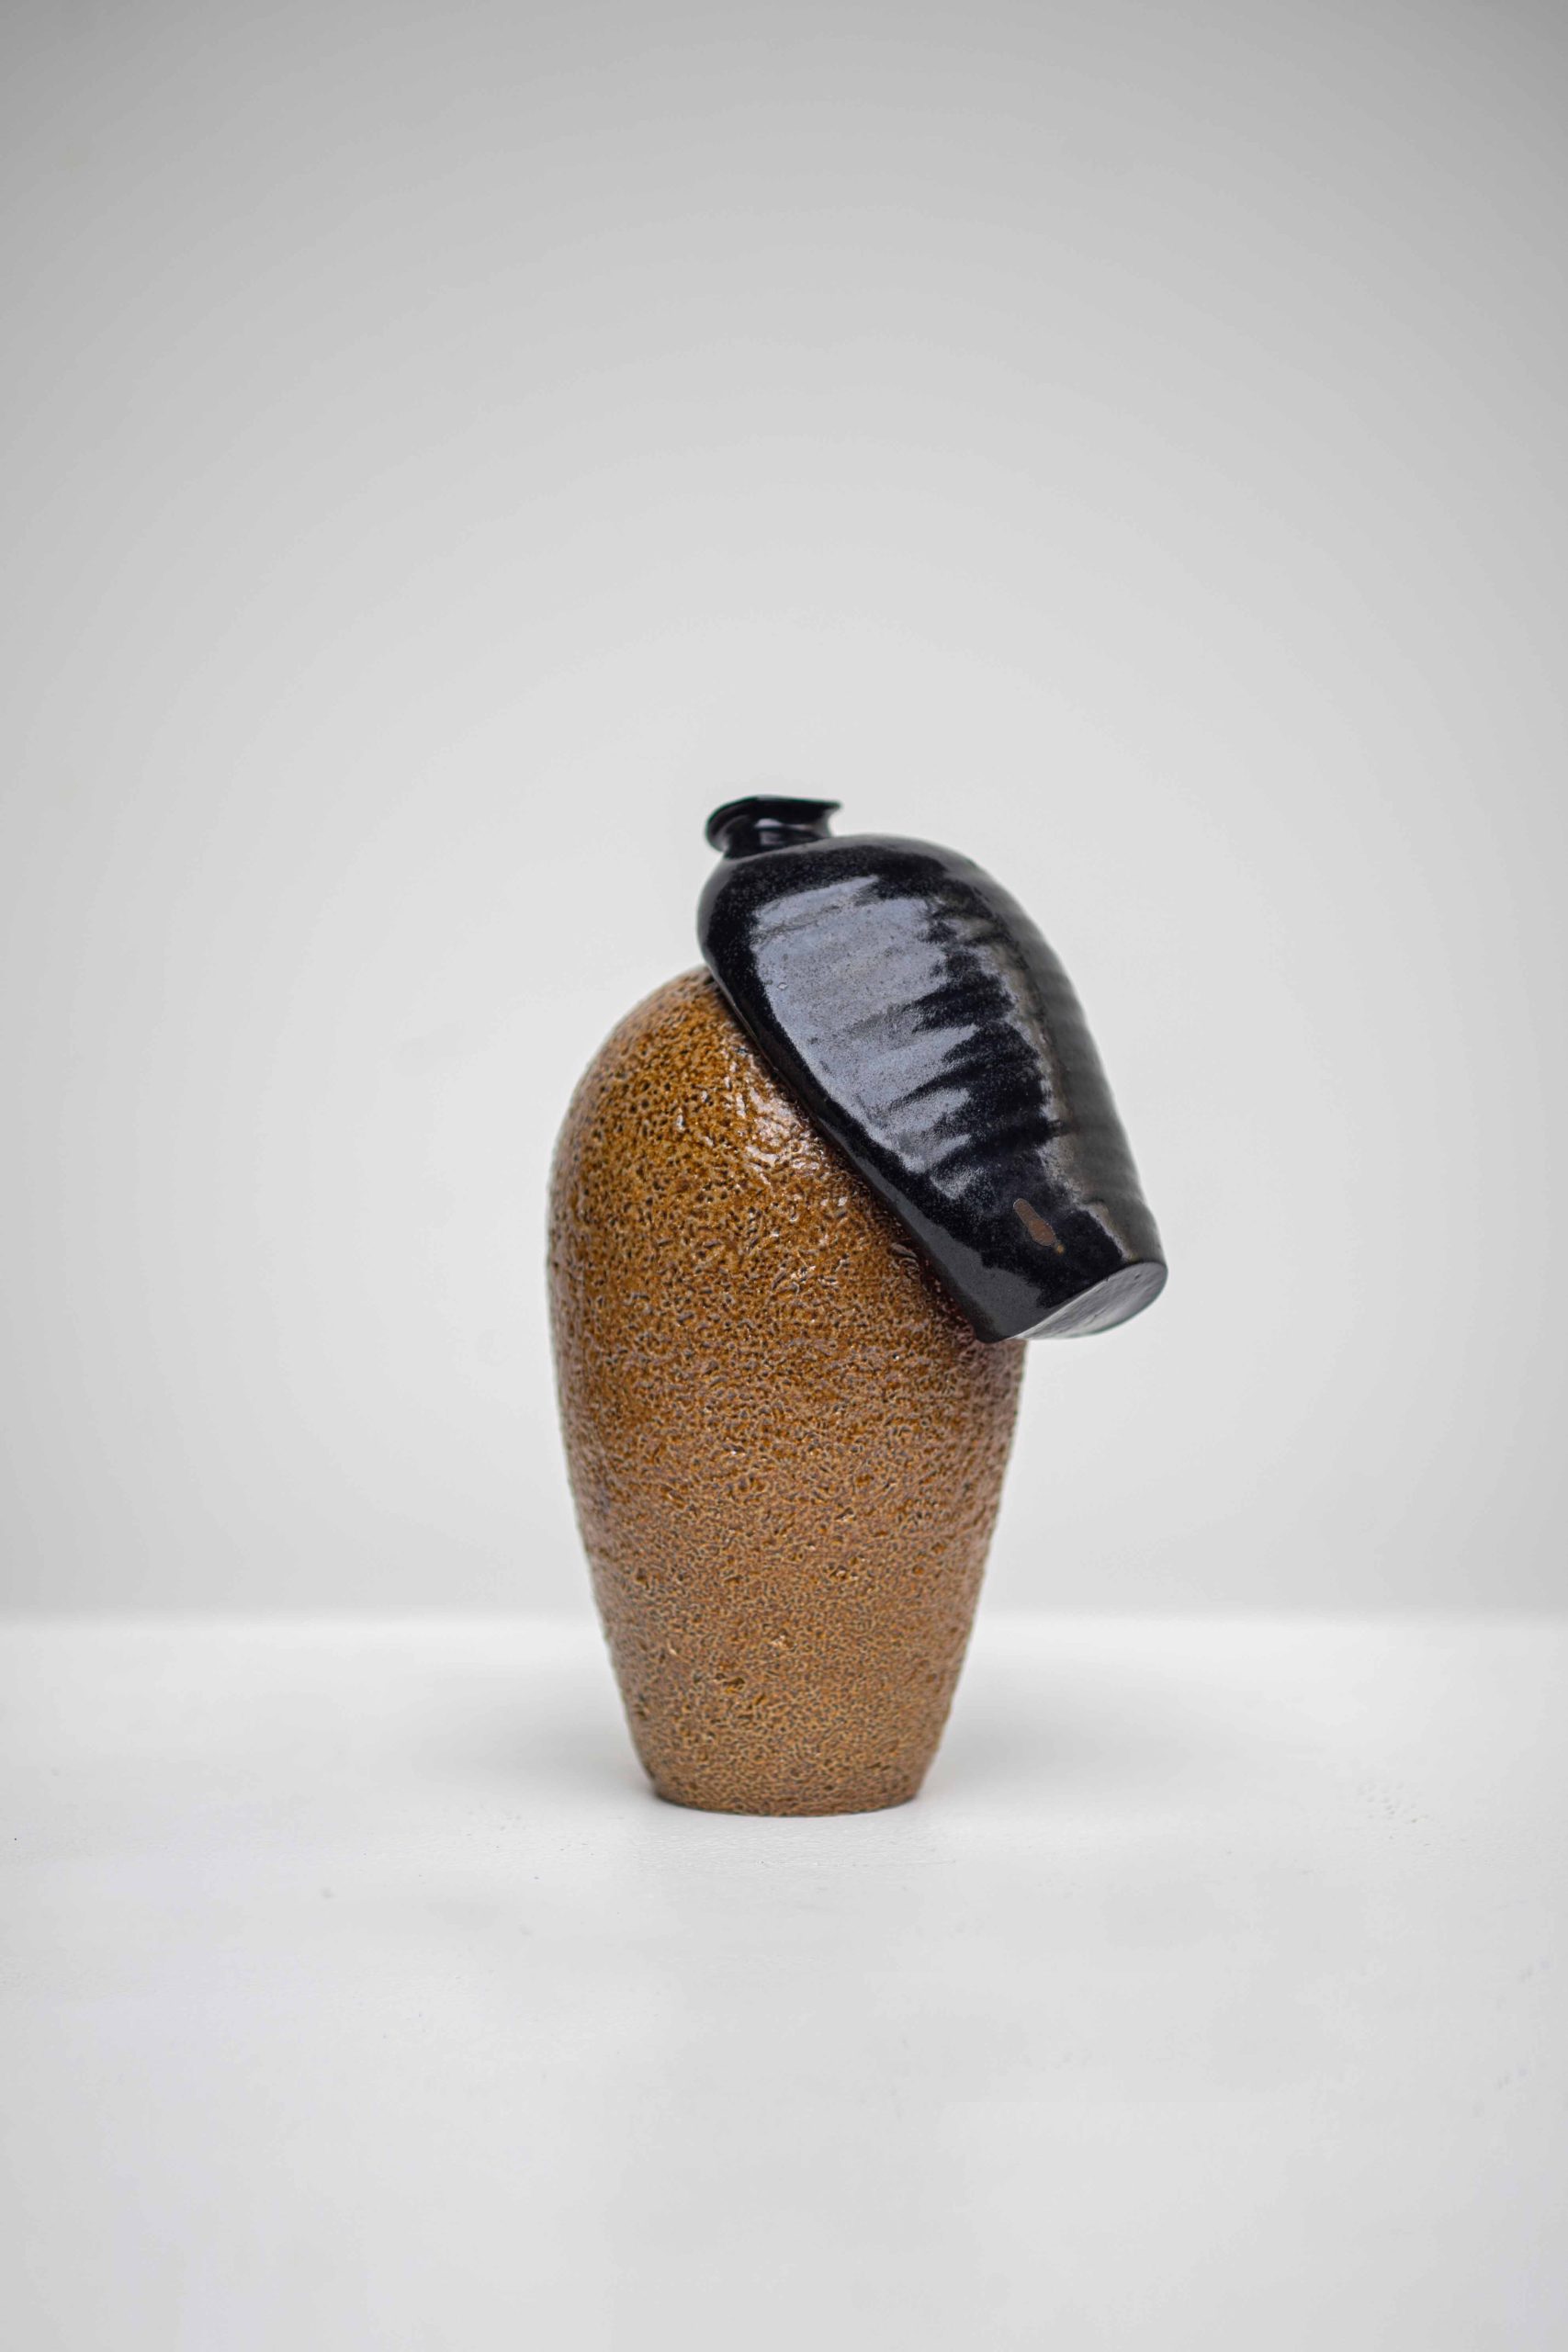 Thomas Baker 5 years working with clay Whakatū / Nelson Bedrock Slumber Party Anagama fired stoneware 210 x 120 x 140